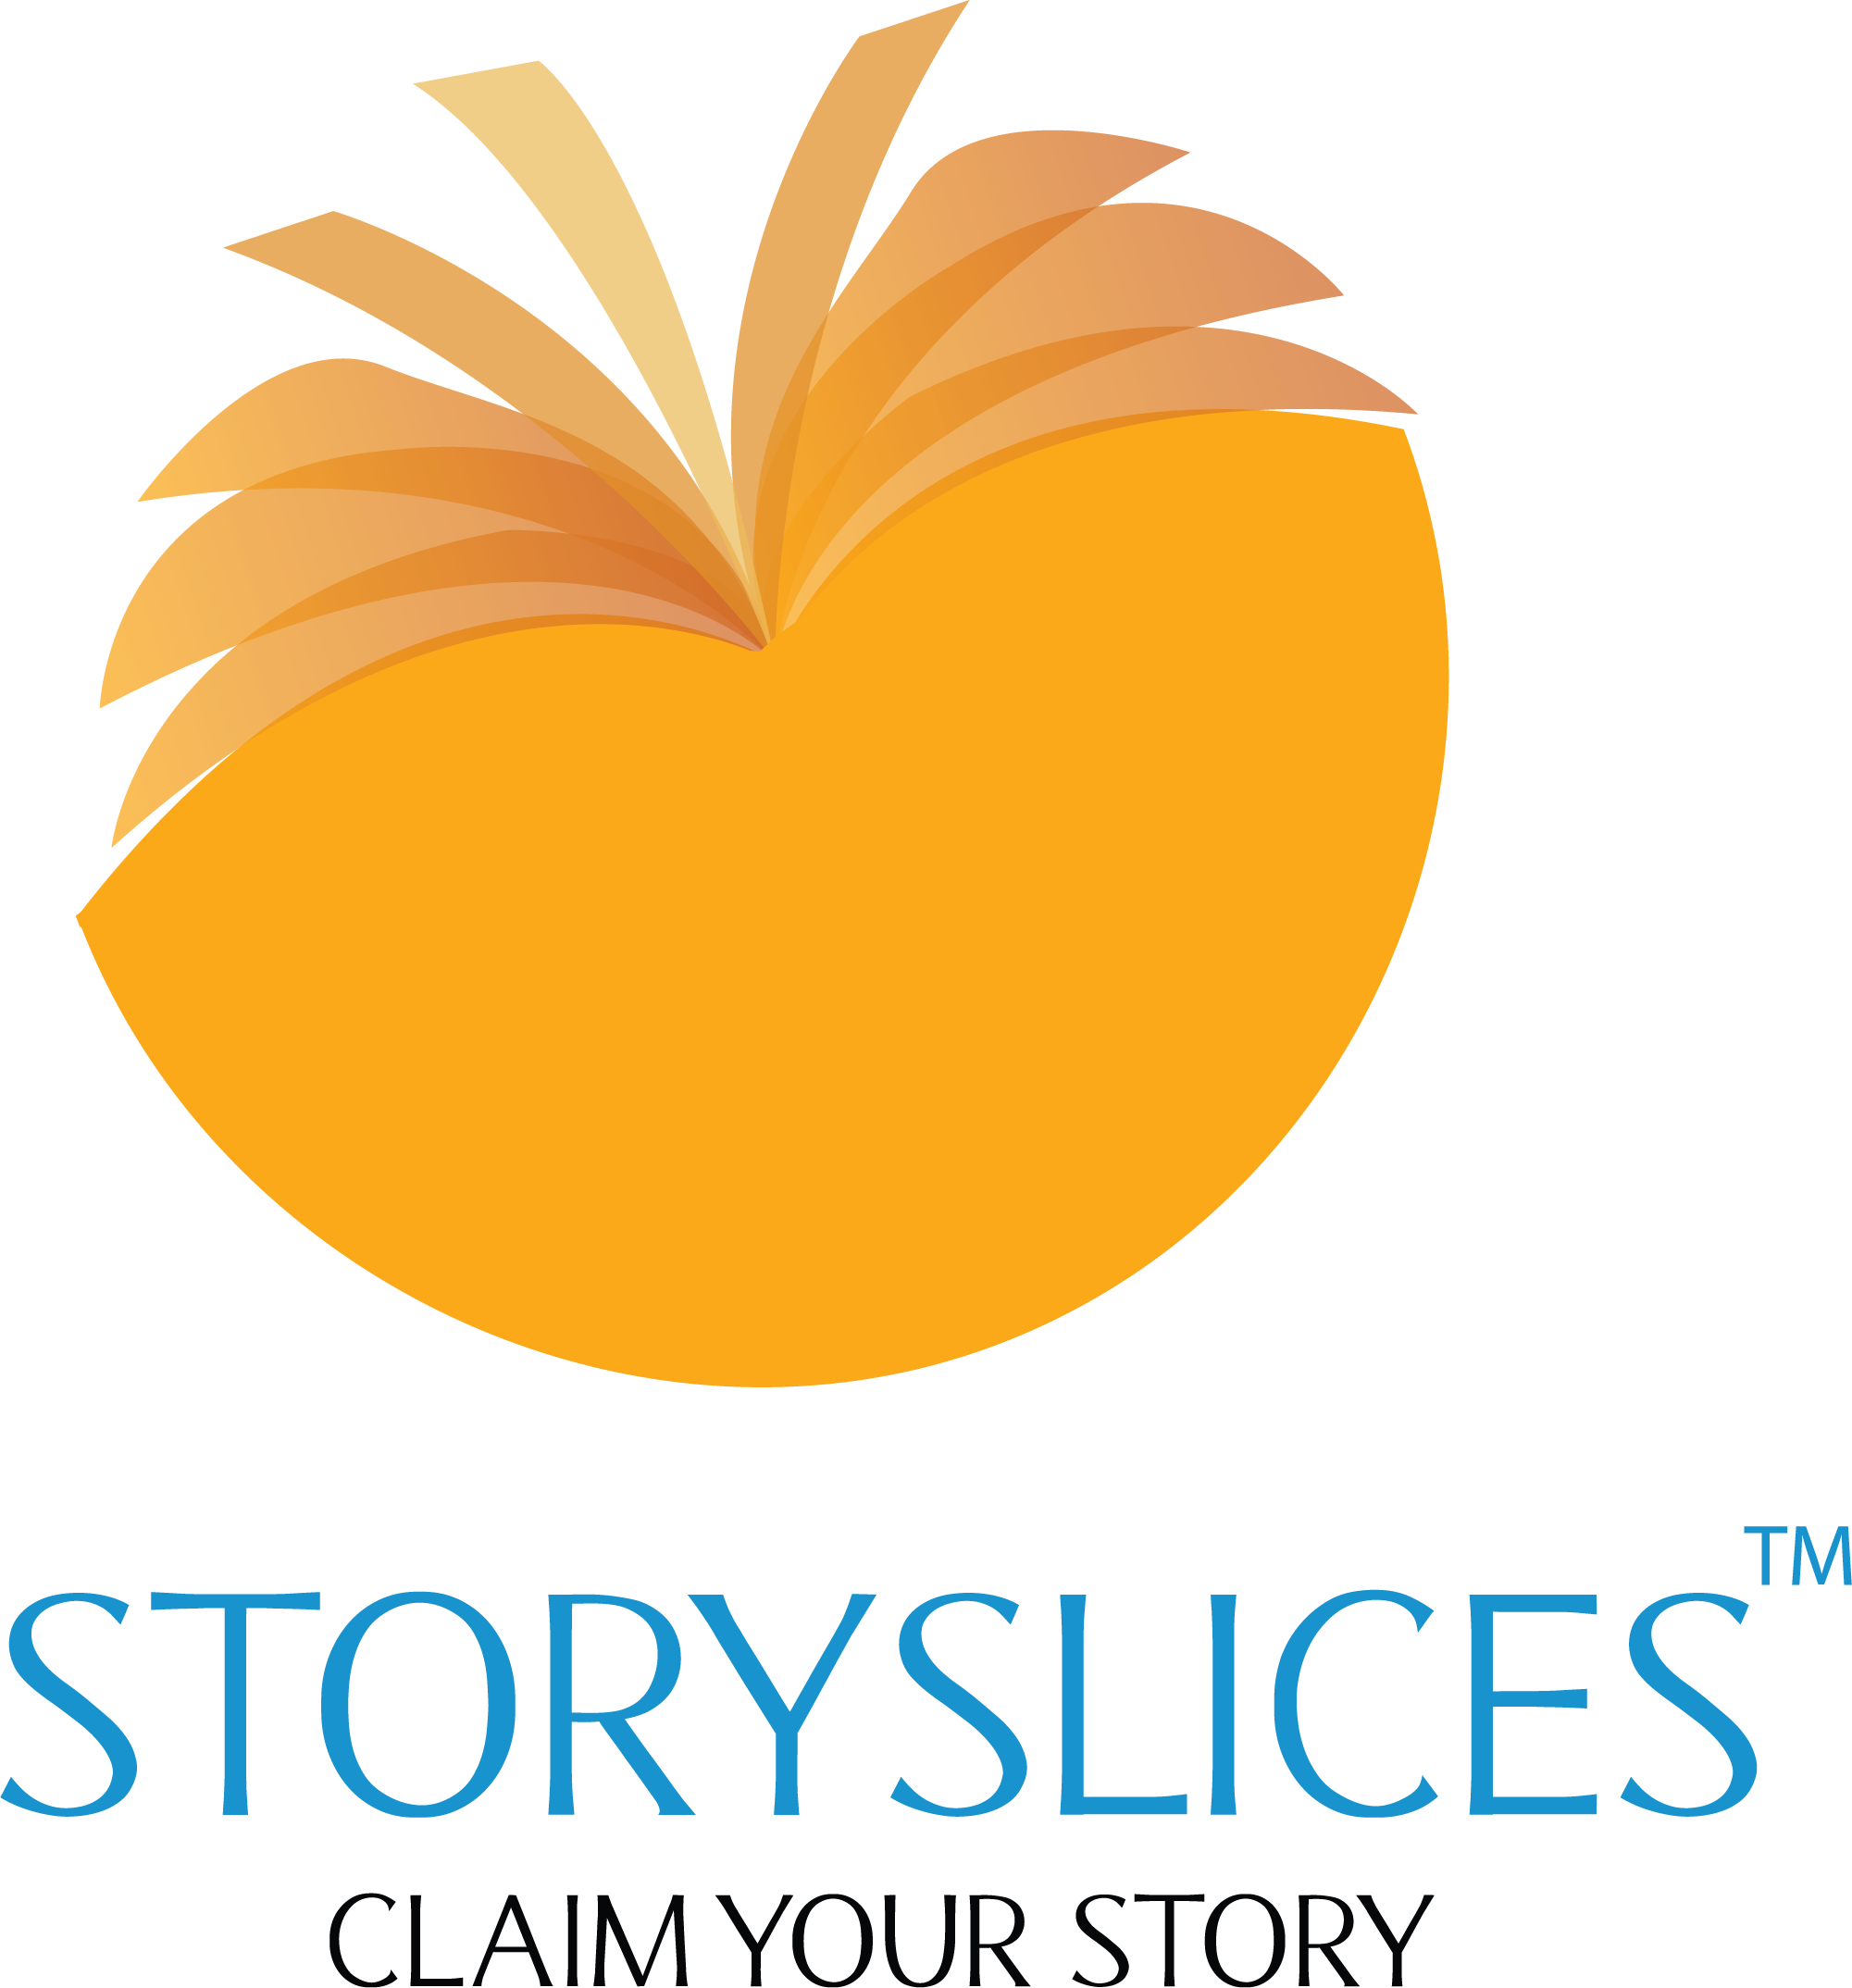 STORYSLICES